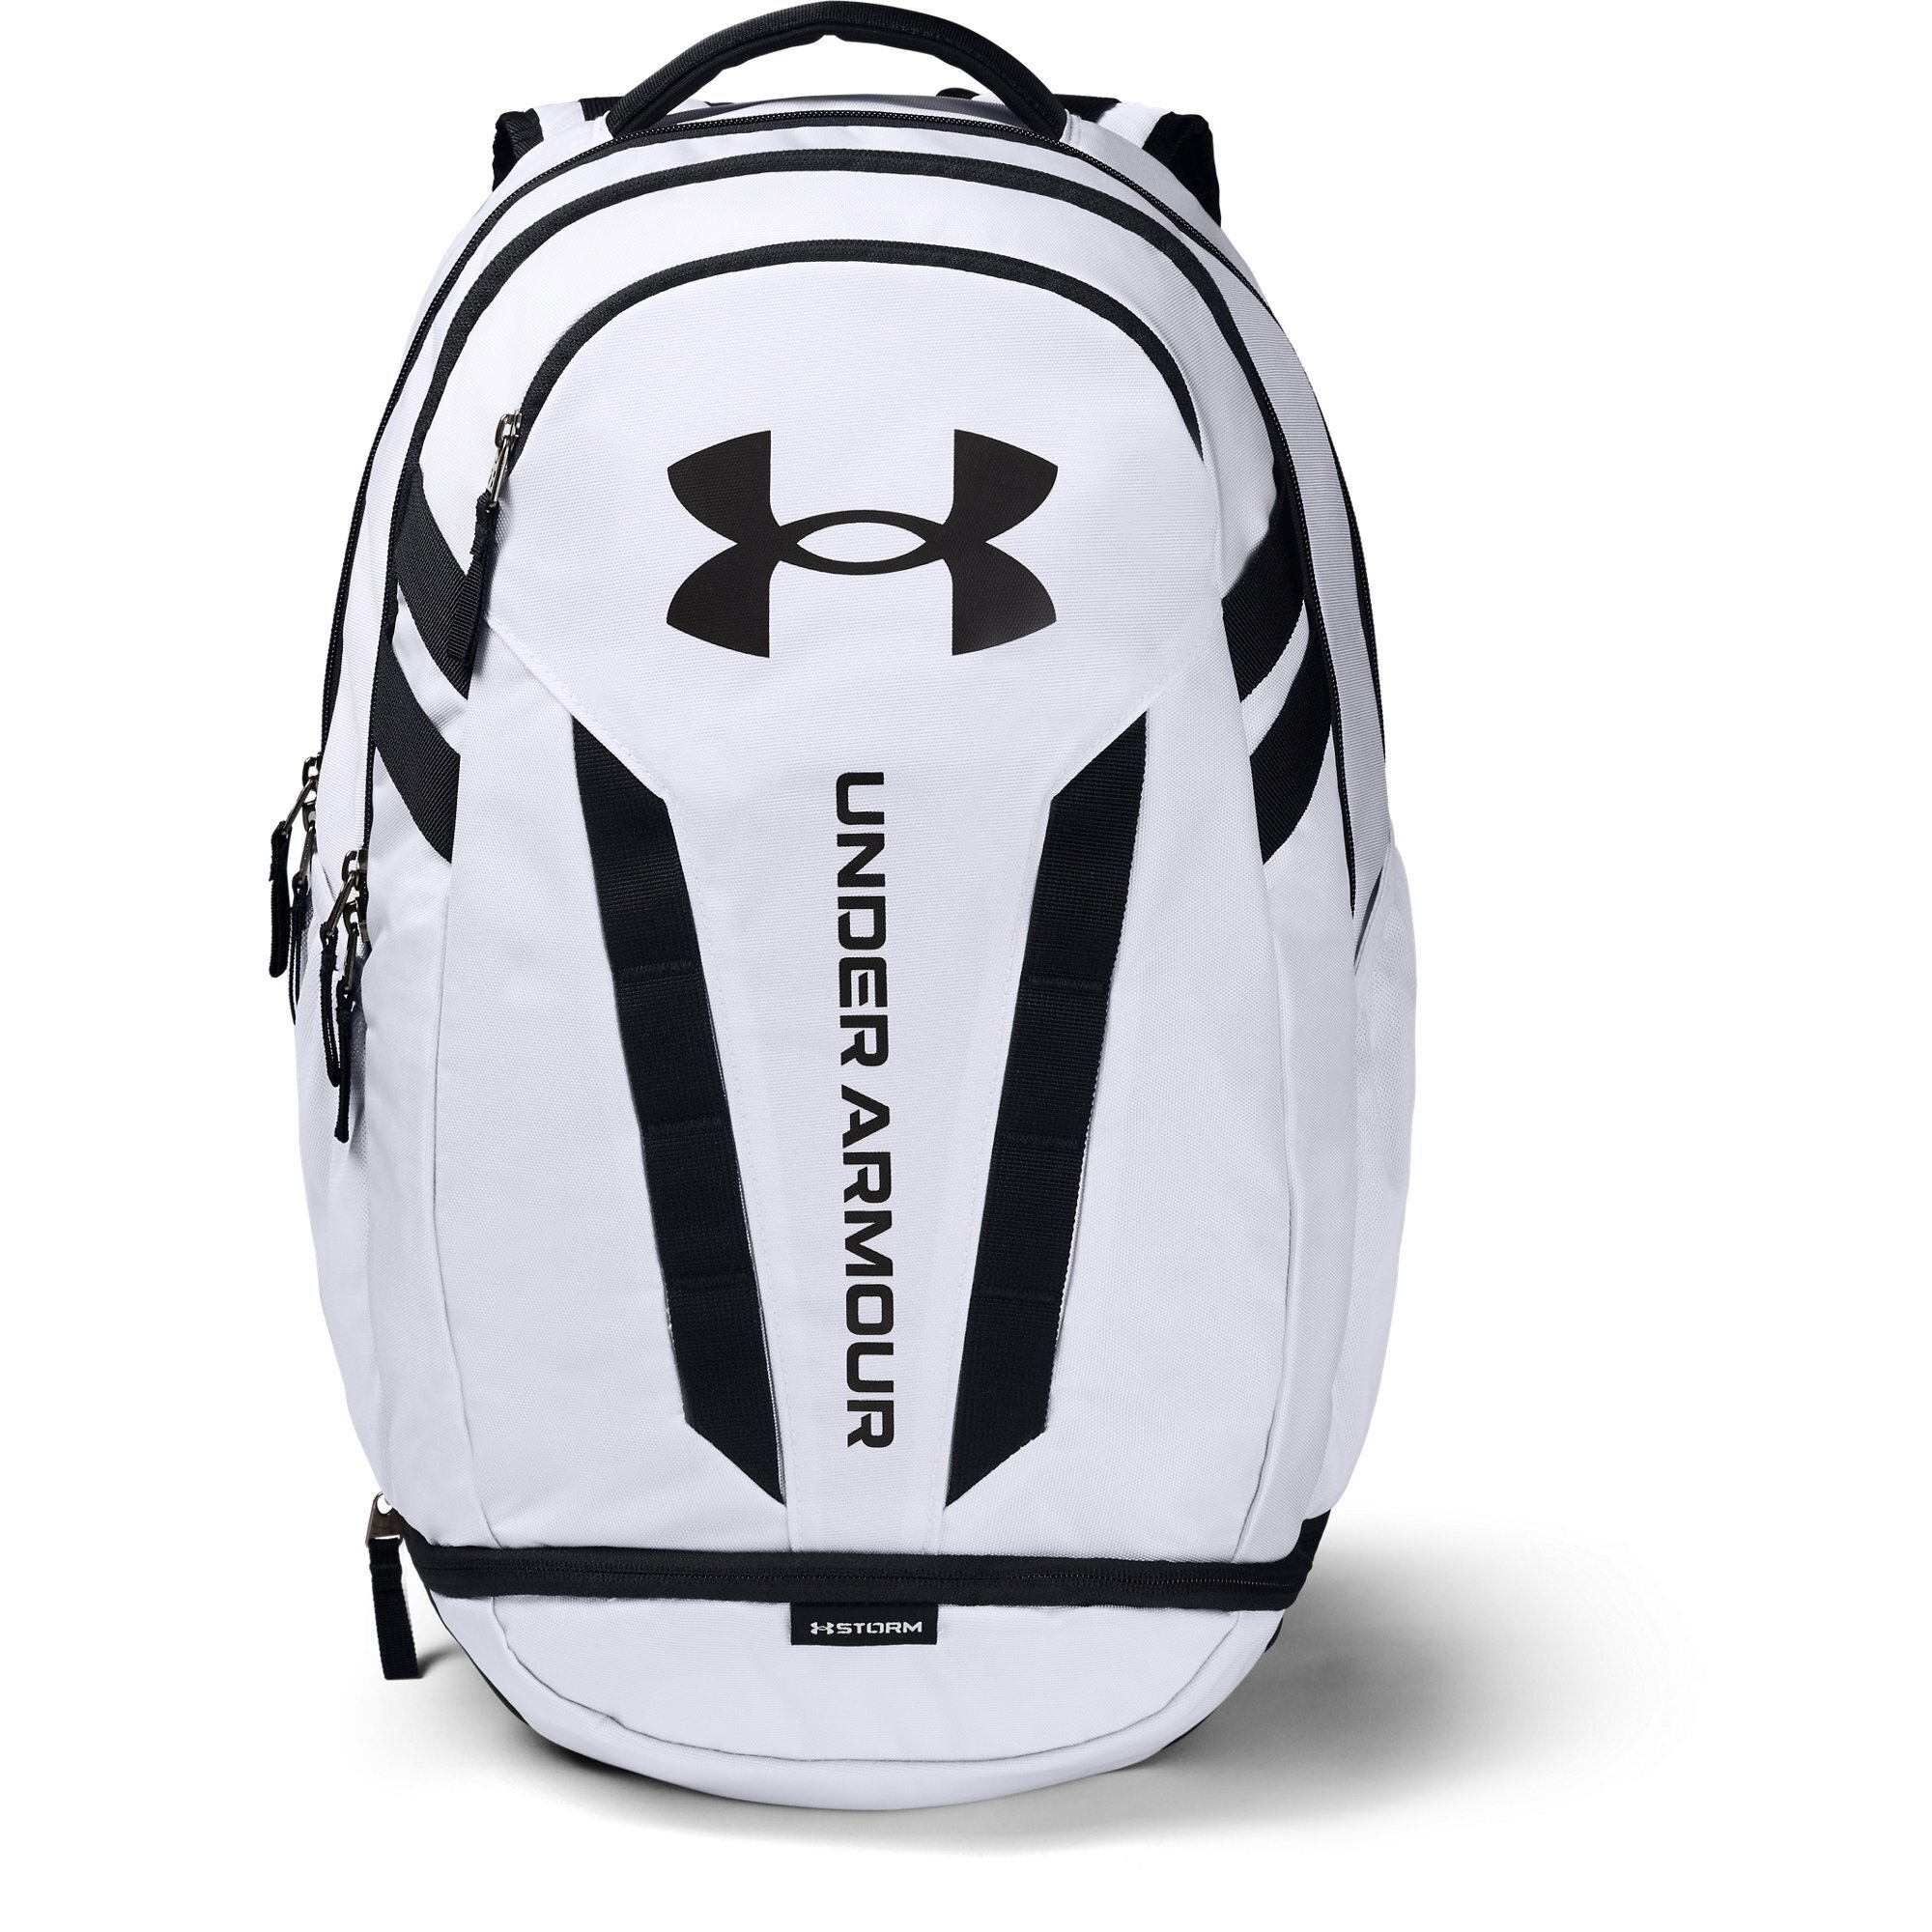 Under Armour Hustle Backpack, White - image 1 of 5